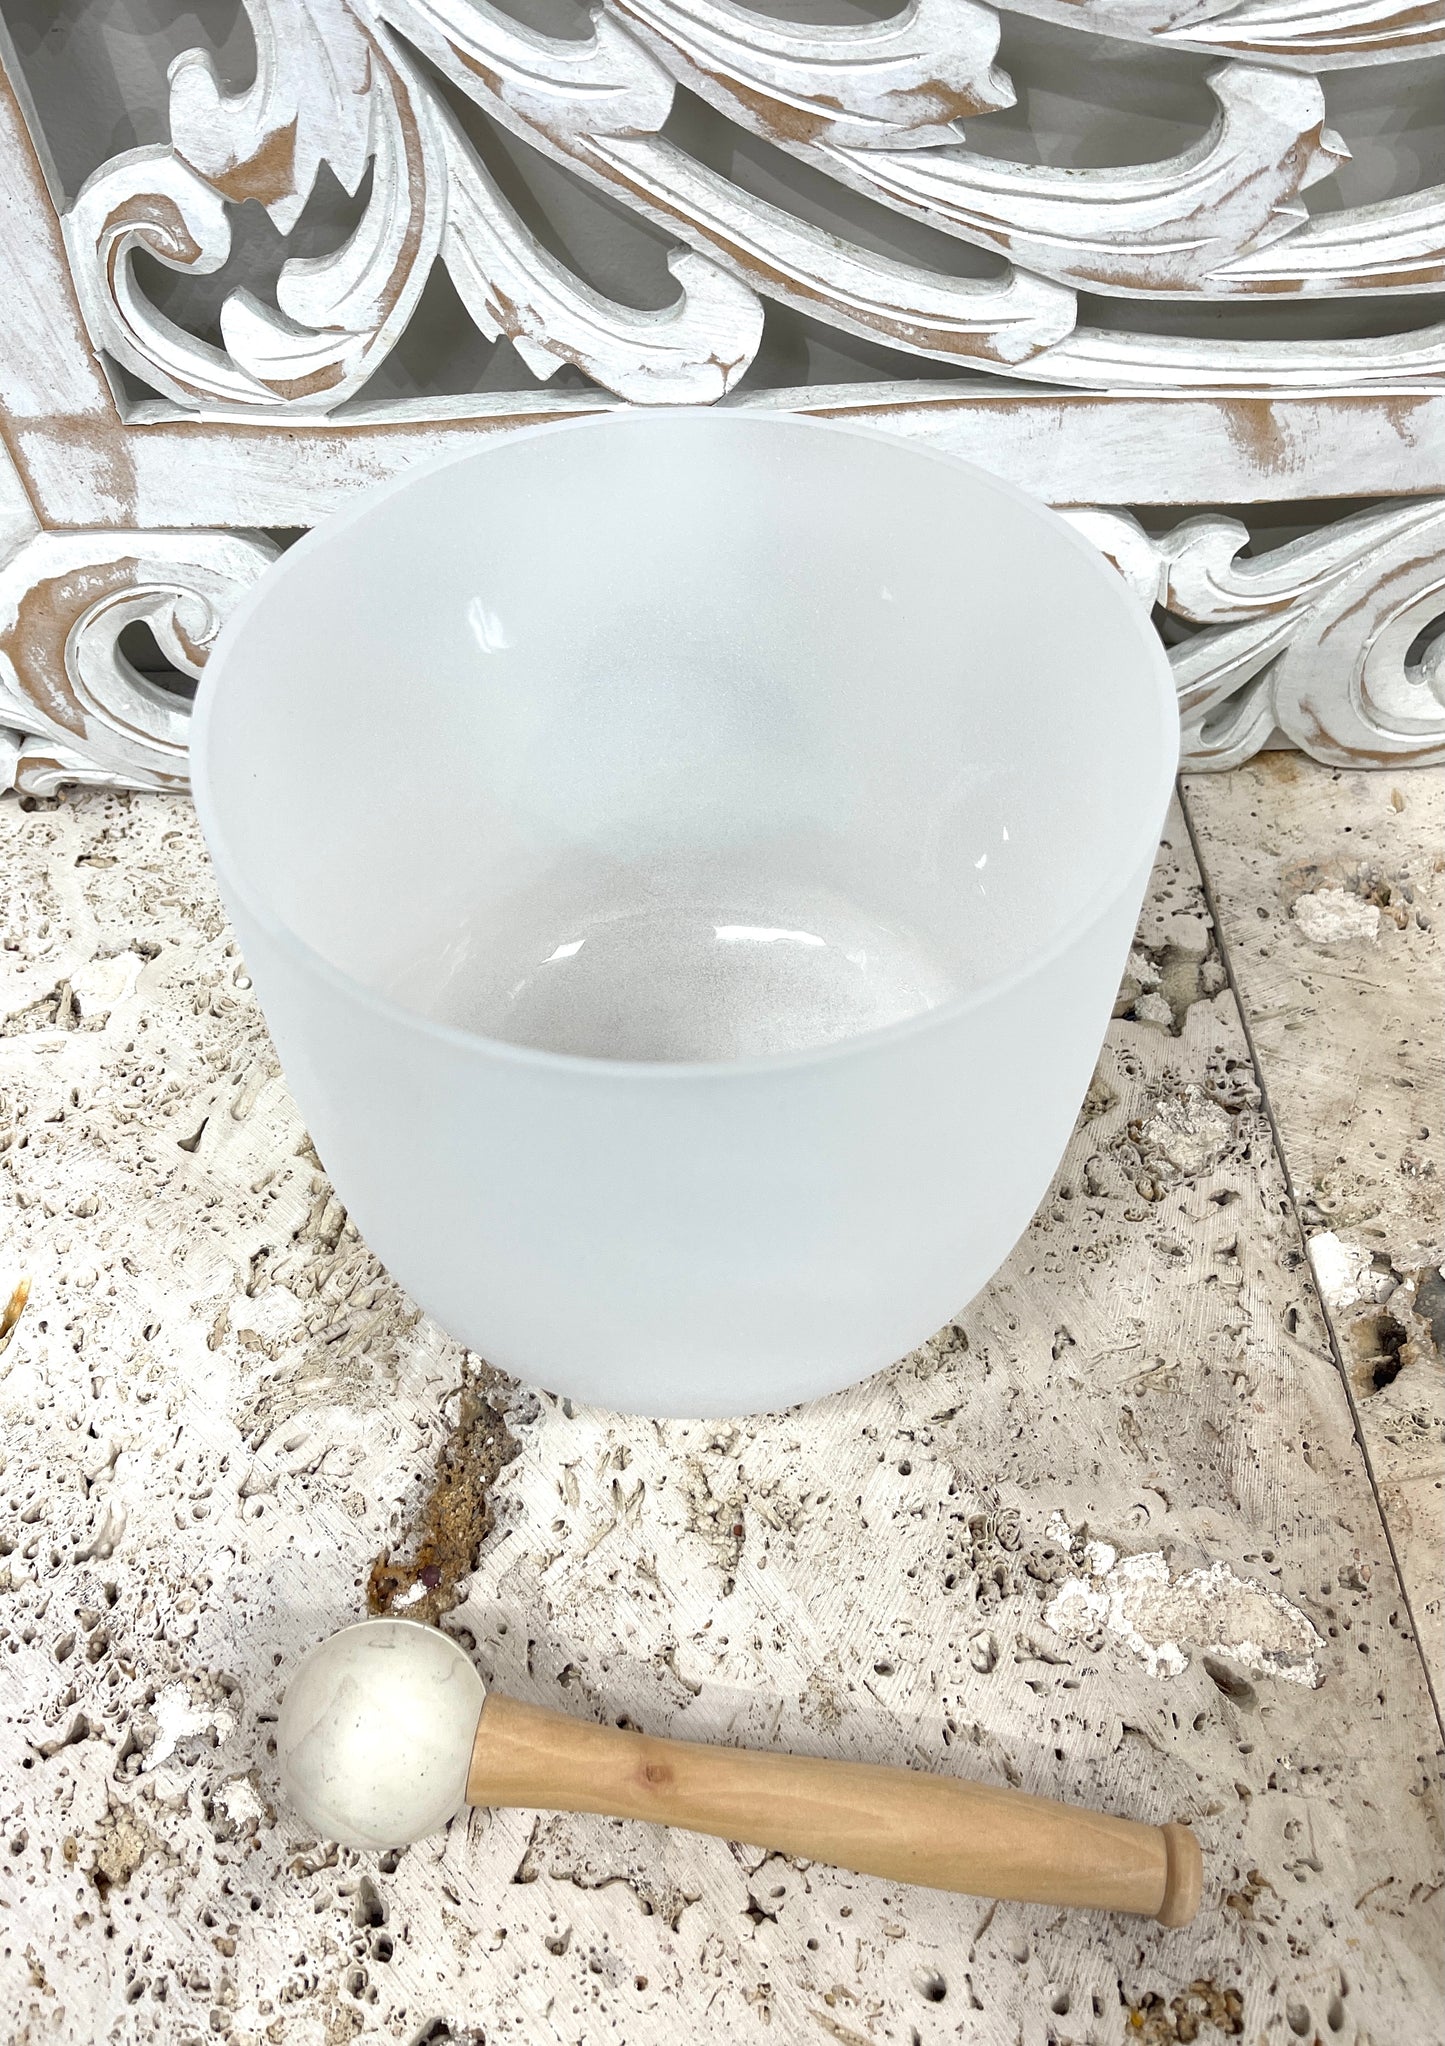 Quartz Crystal Singing bowls - Available in sizes 7" - 12"